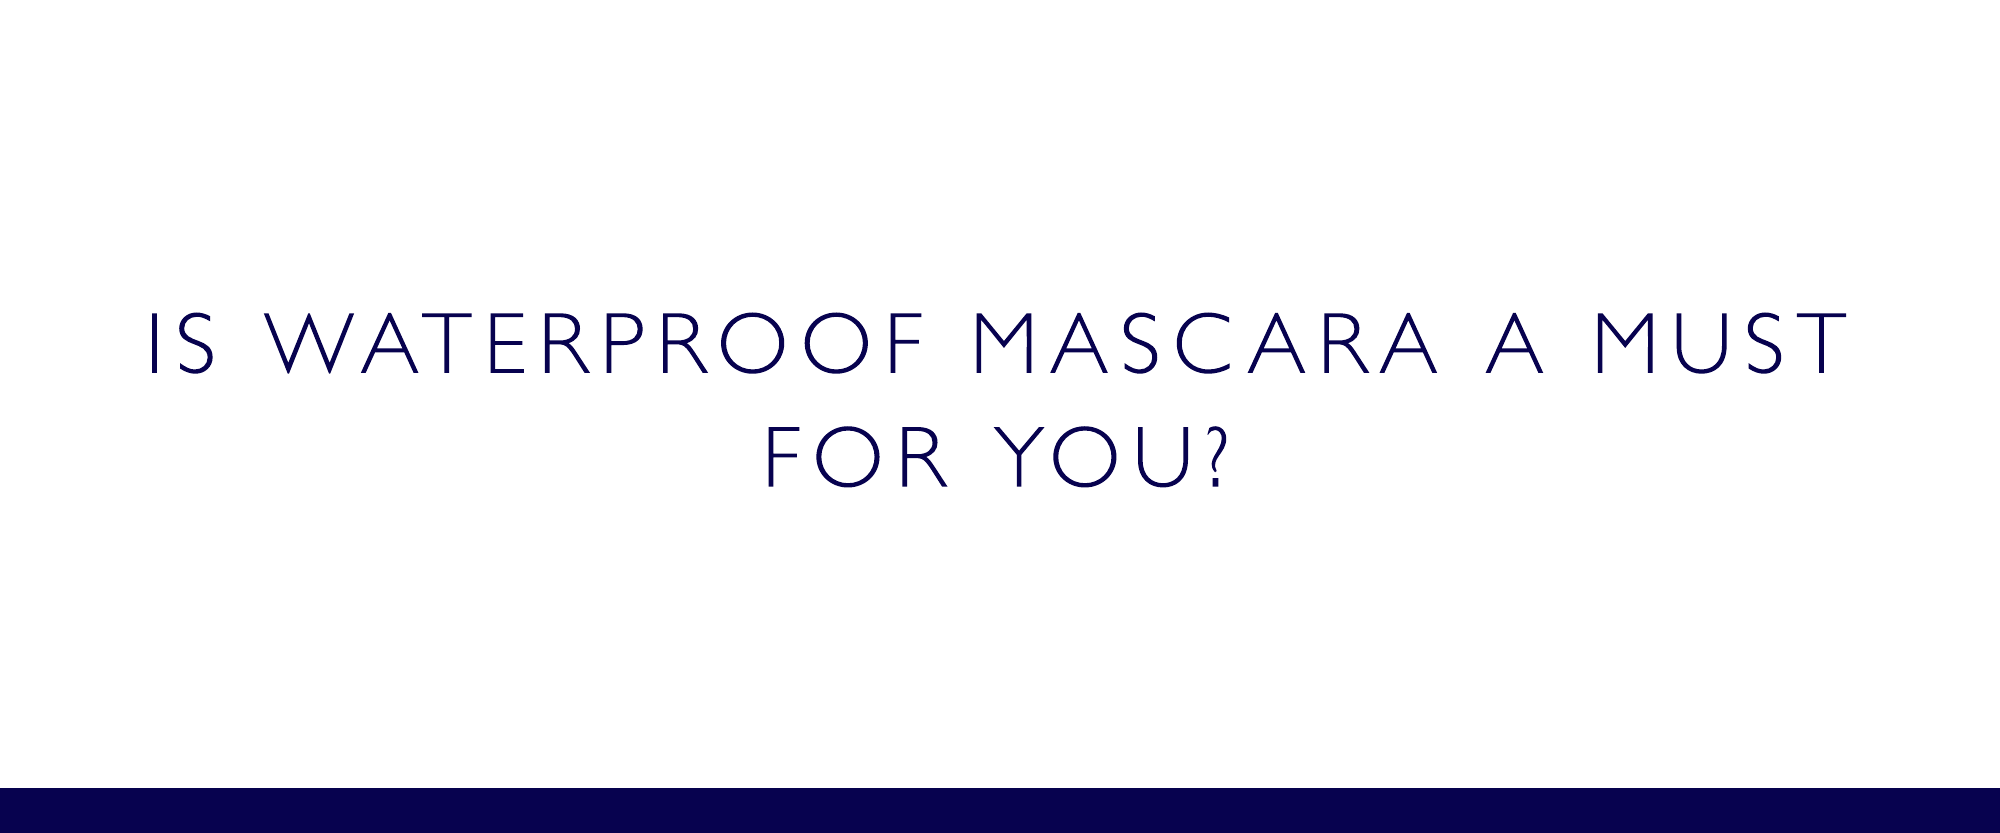 Is waterproof mascara a must for you?